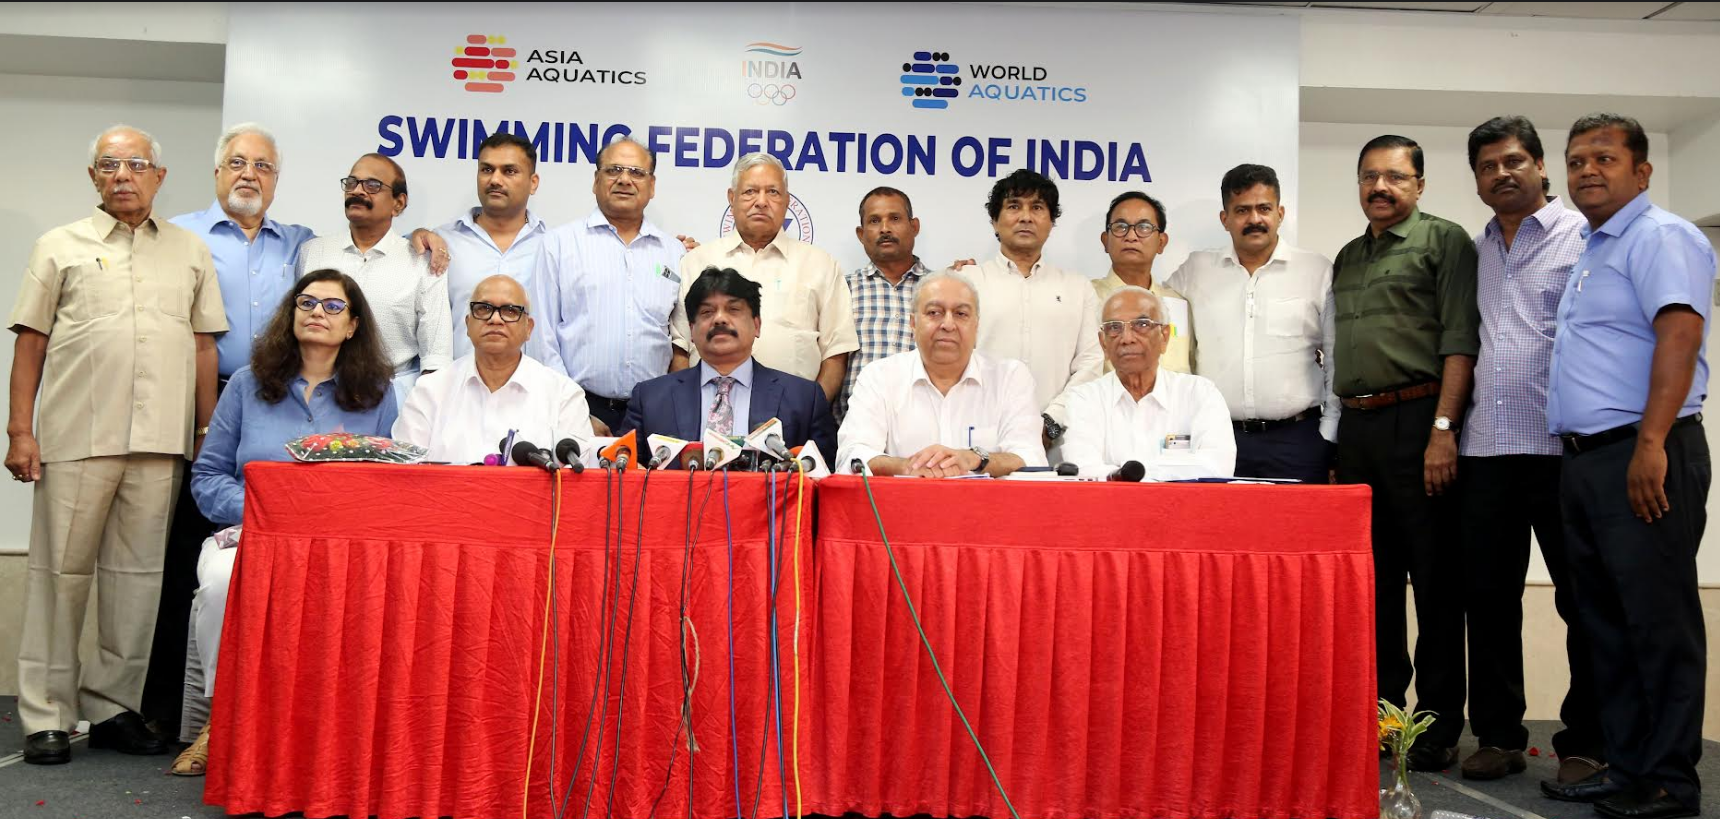 R.N Jayaprakash elected as President of Swimming Federation of India at chennai 20 May 2023, Chennai:-The Swimming Federation of India (SFI) Annual General Body Meeting and Election held on 21st May 2023, Sunday, at 10:00 AM. This highly anticipated event held at Hotel Savera in Chennai, and it aims to facilitate the election of new office bearers who will steer the future of swimming in India. The Annual General Body Meeting is a significant occasion where the members of the Swimming Federation of India gather to discuss the progress and achievements of the past year. This year, the focus will be on the election of new office bearers who will assume critical positions within the federation, playing a crucial role in developing and promoting swimming across the nation. R.N Jayaprakash elected as President, Swimming Federation of India and Secretary Monal Chokshi, Treasurer Sudesh Nagvenkar of Swimming Federation of India at chennai. R.N Jayaprakash at Annual General Body Meeting said “It's been a privilege to be reelected as the President of the Swimming Federation of India for a second consecutive term. During my first tenure, I can proudly state that Indian swimming has progressed tremendously as we witnessed history being created when 2 of our nation's swimmers achieved the A Qualifying standard for the Olympic games in 2021. Despite the Covid pandemic, SFI has assured that the entire swimming fraternity in India had the optimal support required in terms of infrastructure, best training facilities, world class coaching, global exposure to our young upcoming junior-level swimmers and strengthening the grassroots level structure of this sport. We have a lot more work to be done and I'm optimistic towards India becoming a dominant global force in Swimming in a few years' time” The Swimming Federation of India has identified key focus areas for its Mission 2028, aimed at furthering the development of swimming in the country. These focus areas include the establishment of a National Database of Swimmers, Coaches, and Academies, the implementation of an Indigenous Coaches Education & Certification pathway, the creation of a systematic Talent Scouting Structure & Protocols, the review of Competition Structure, and the development of a National Talent Pool & Athlete Development Pathway.